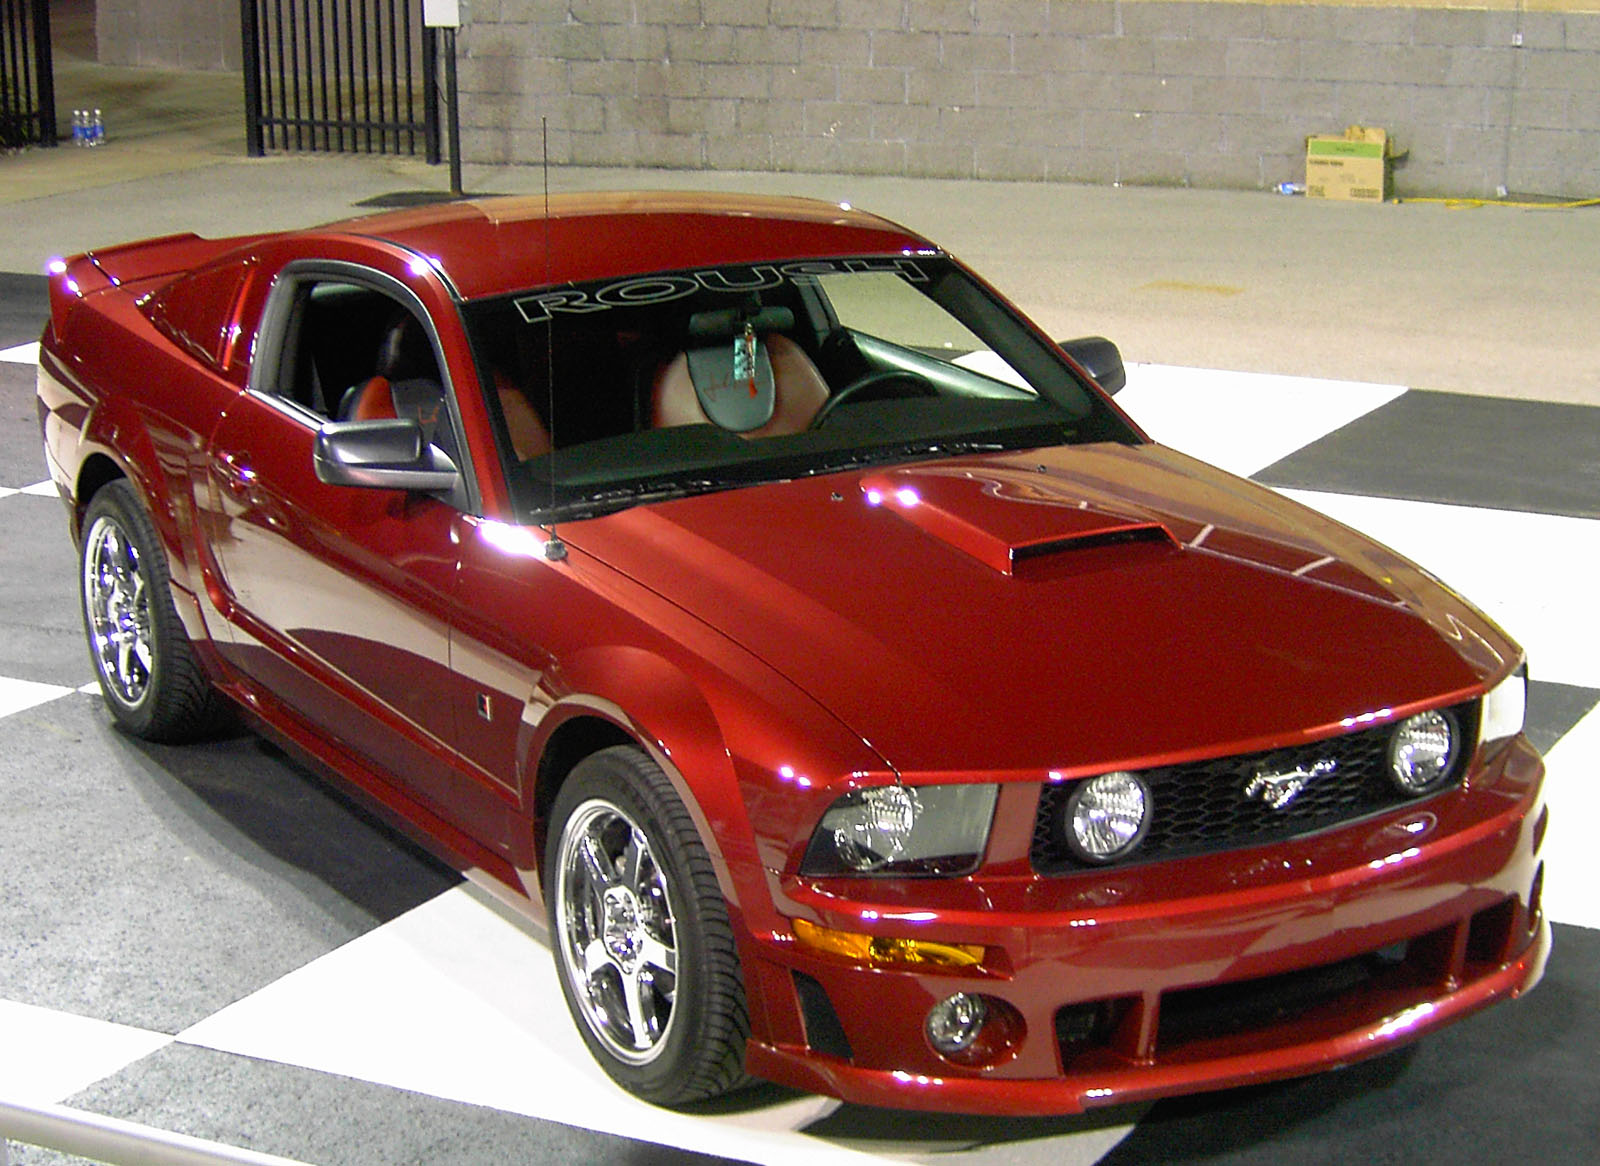 2006 Ford mustang modifications #1